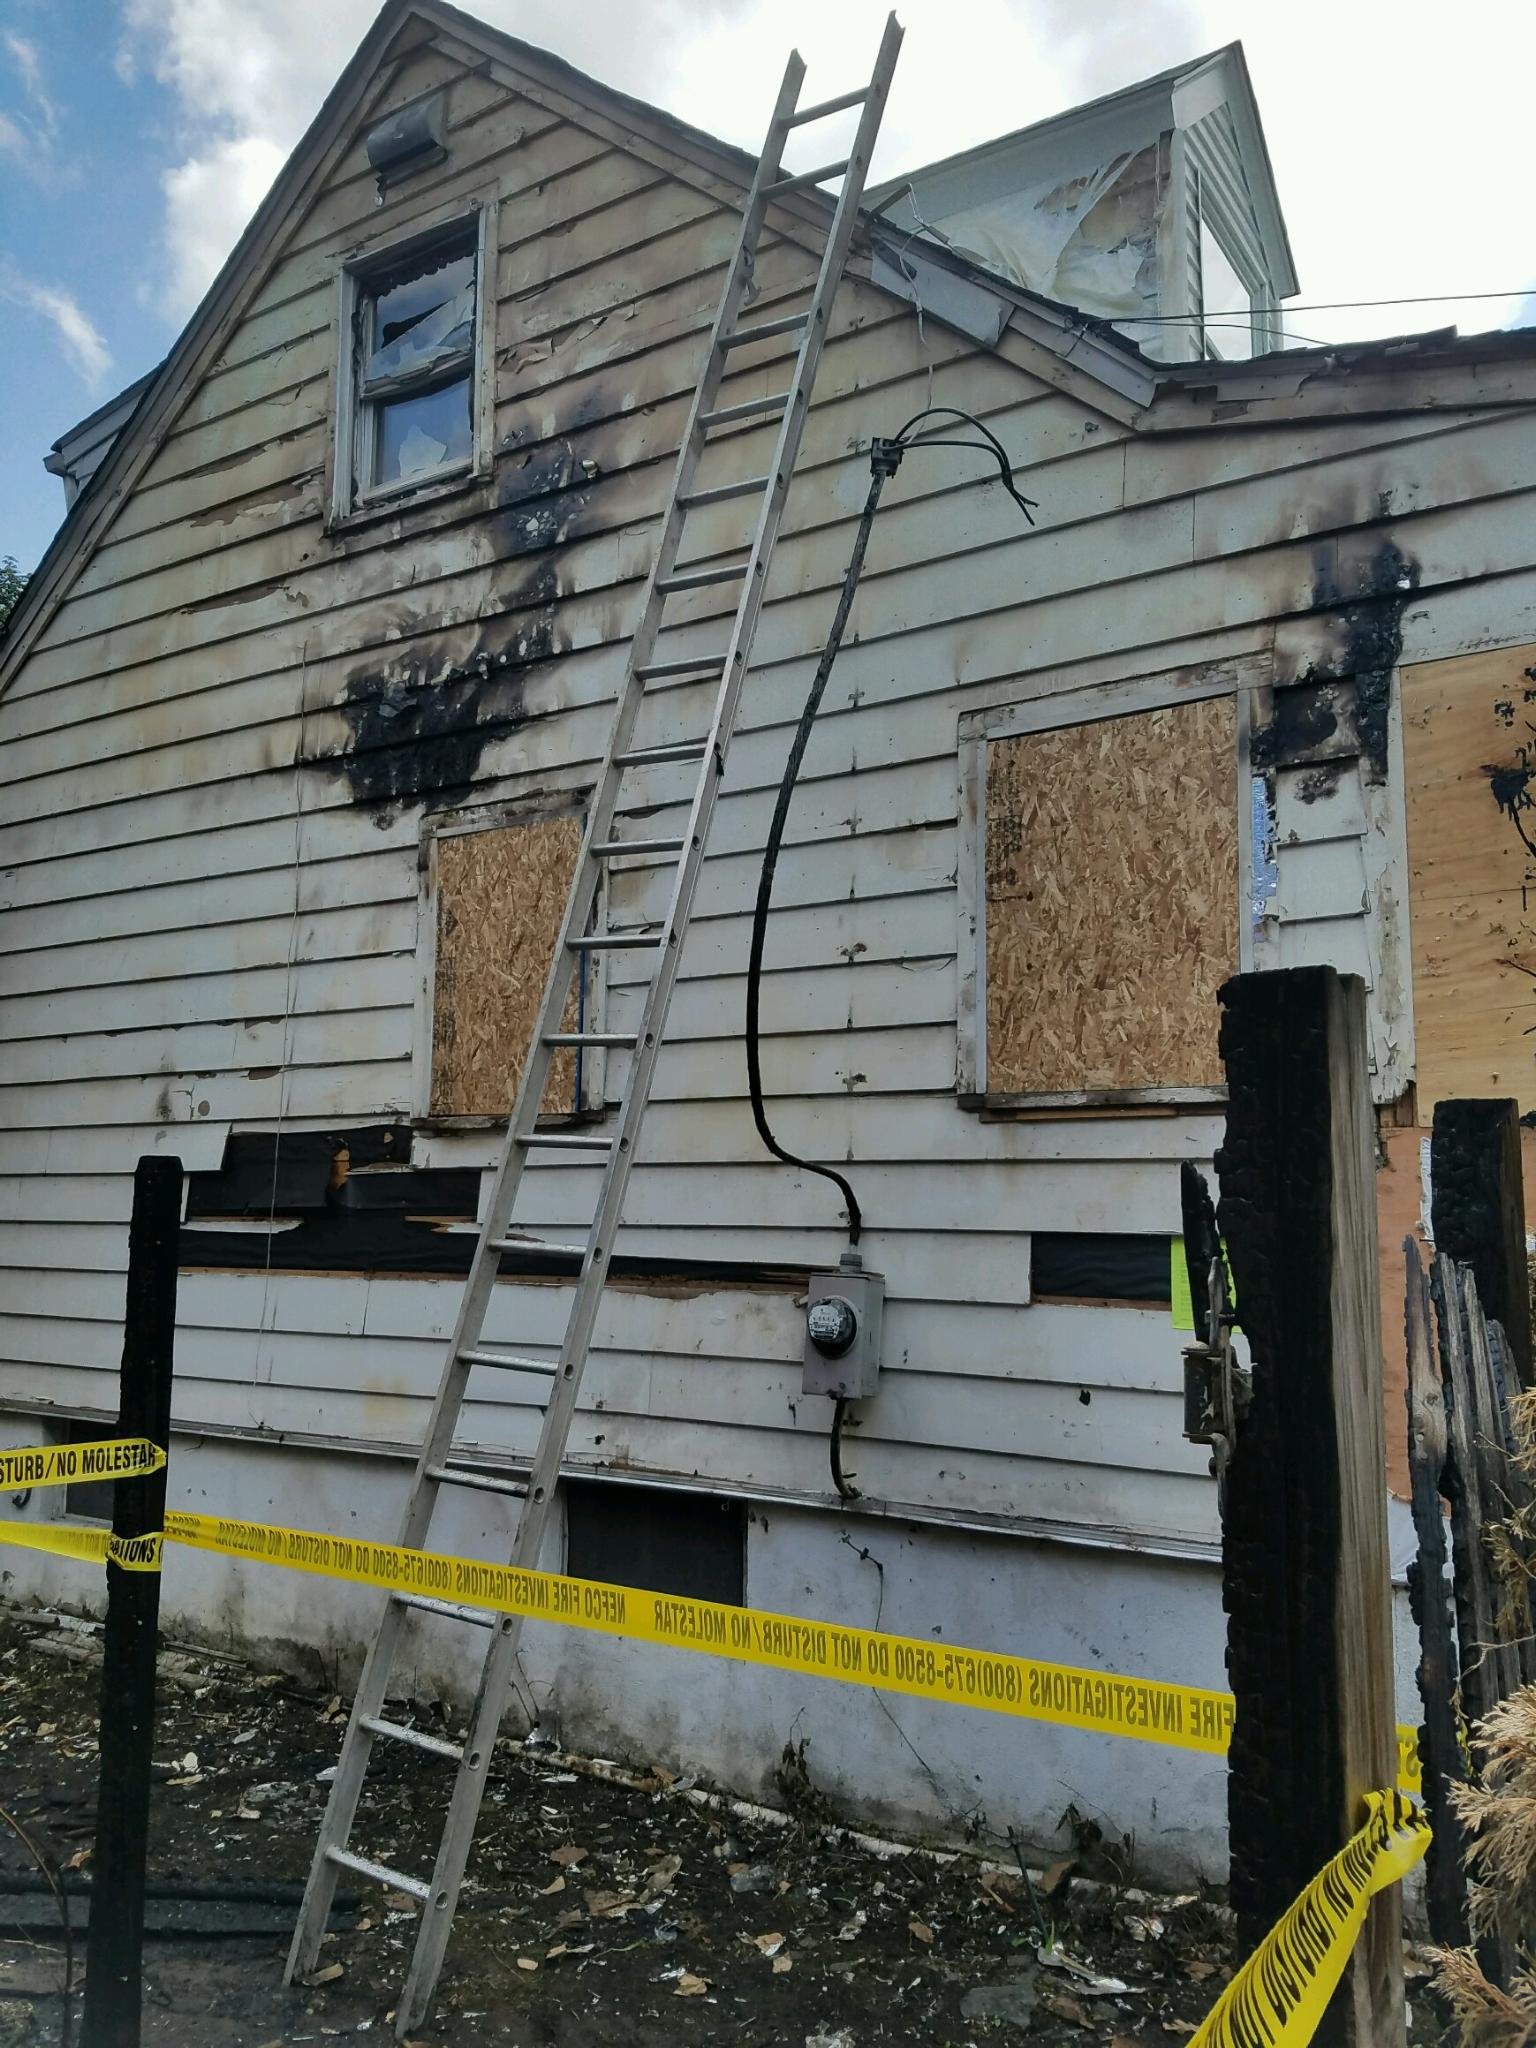 As a homeowner, it is important to understand the key elements of fire damage to your home: smoke and soot and heat. Smoke and soot cause discoloration of surfaces and smell terrible. Heat causes your structure to weaken, especially in roof systems and can also warp floors and other materials that aren't protected by a finish or sealant